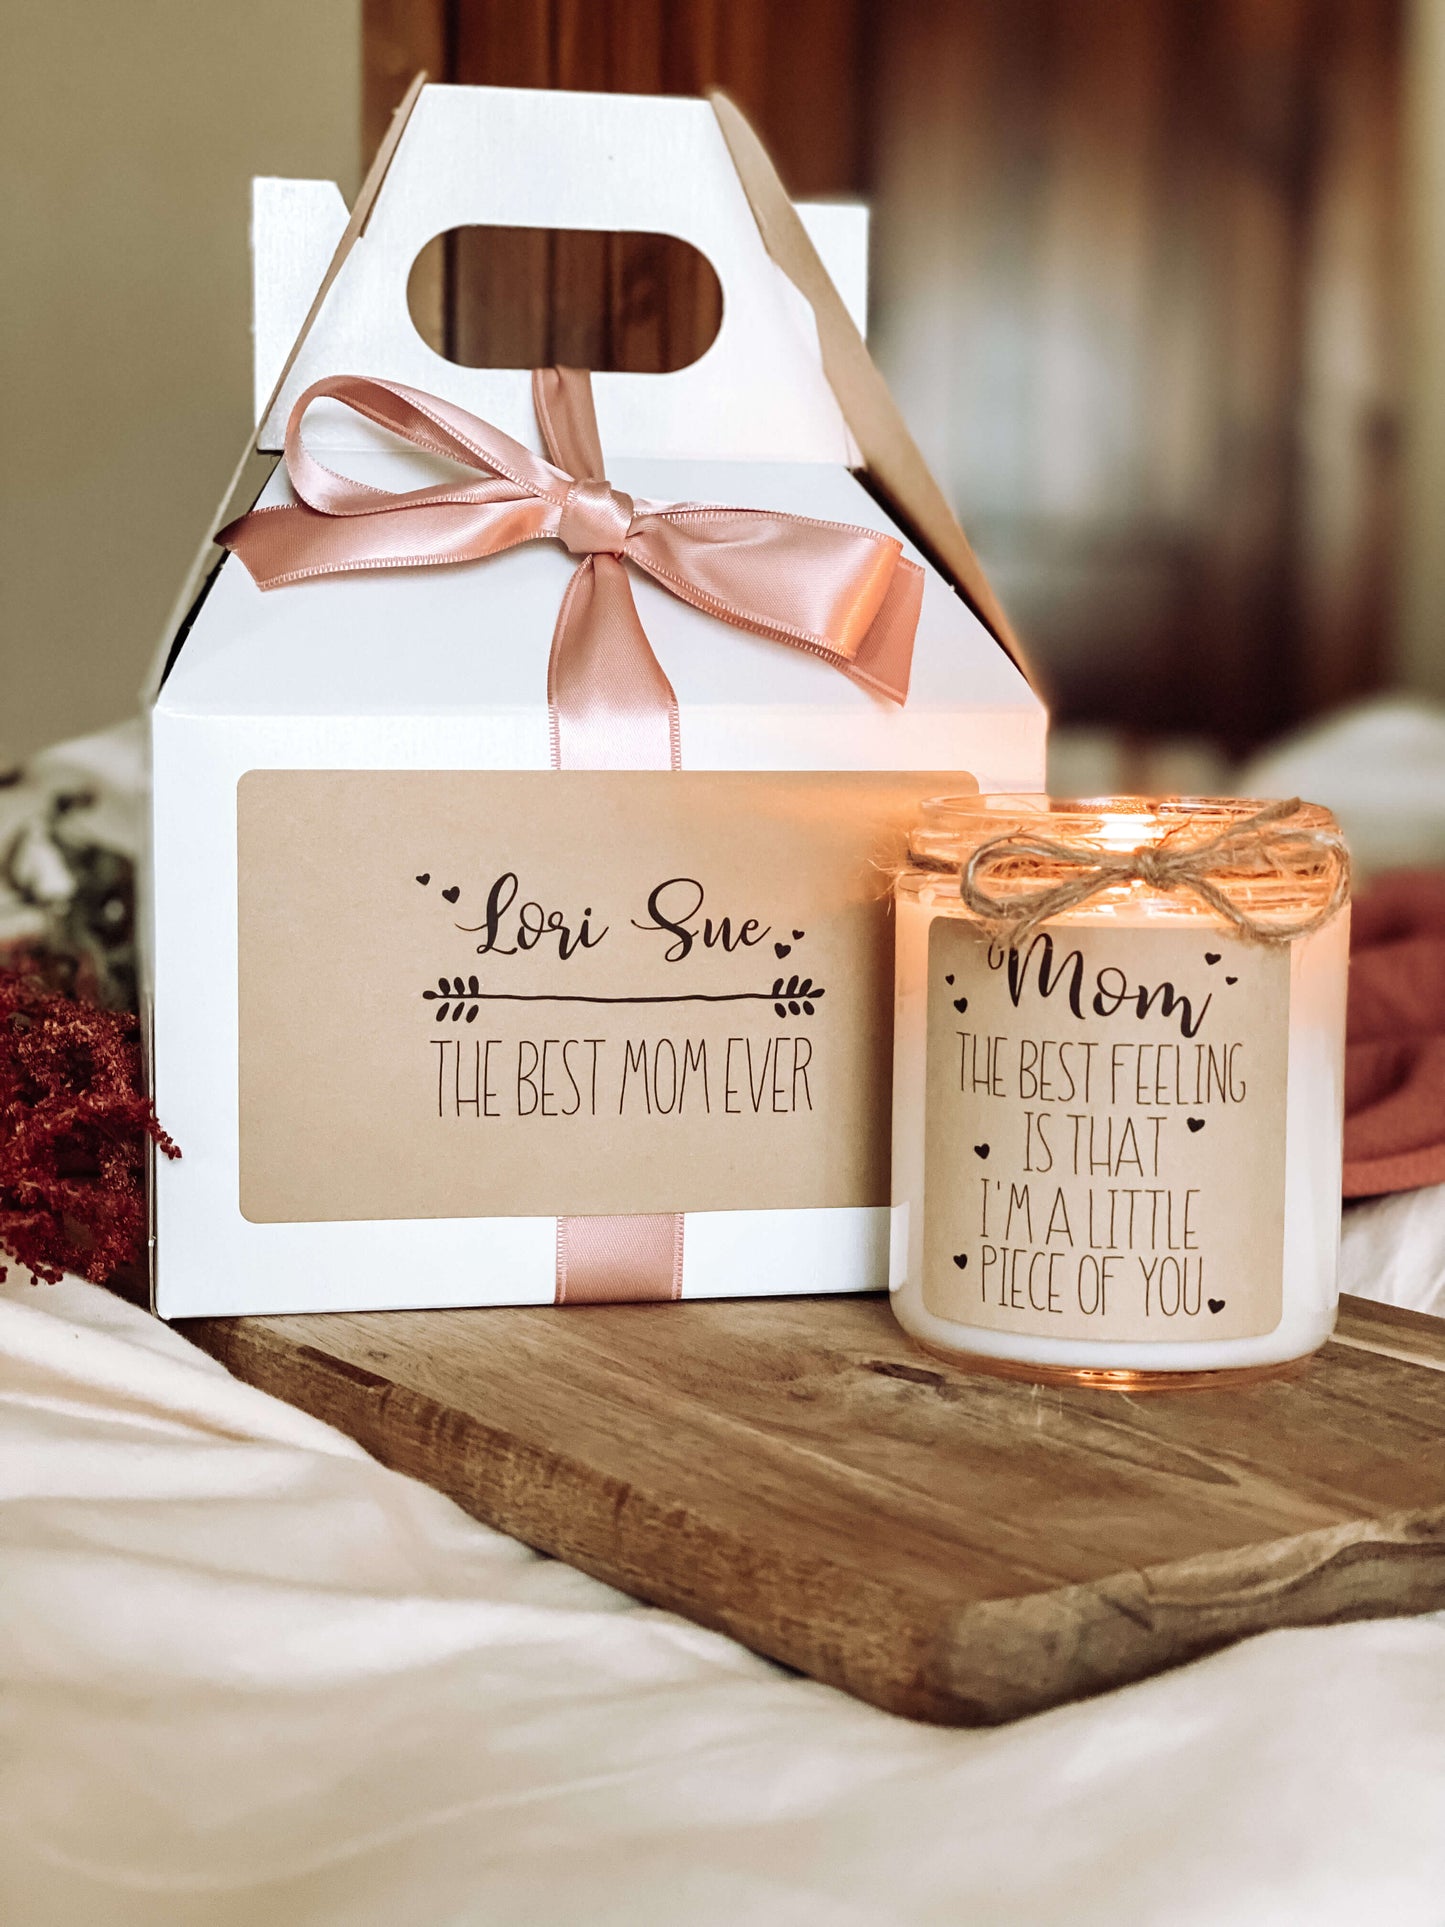 Candle Gift Box For Mom, Best Mom Ever Gift Box